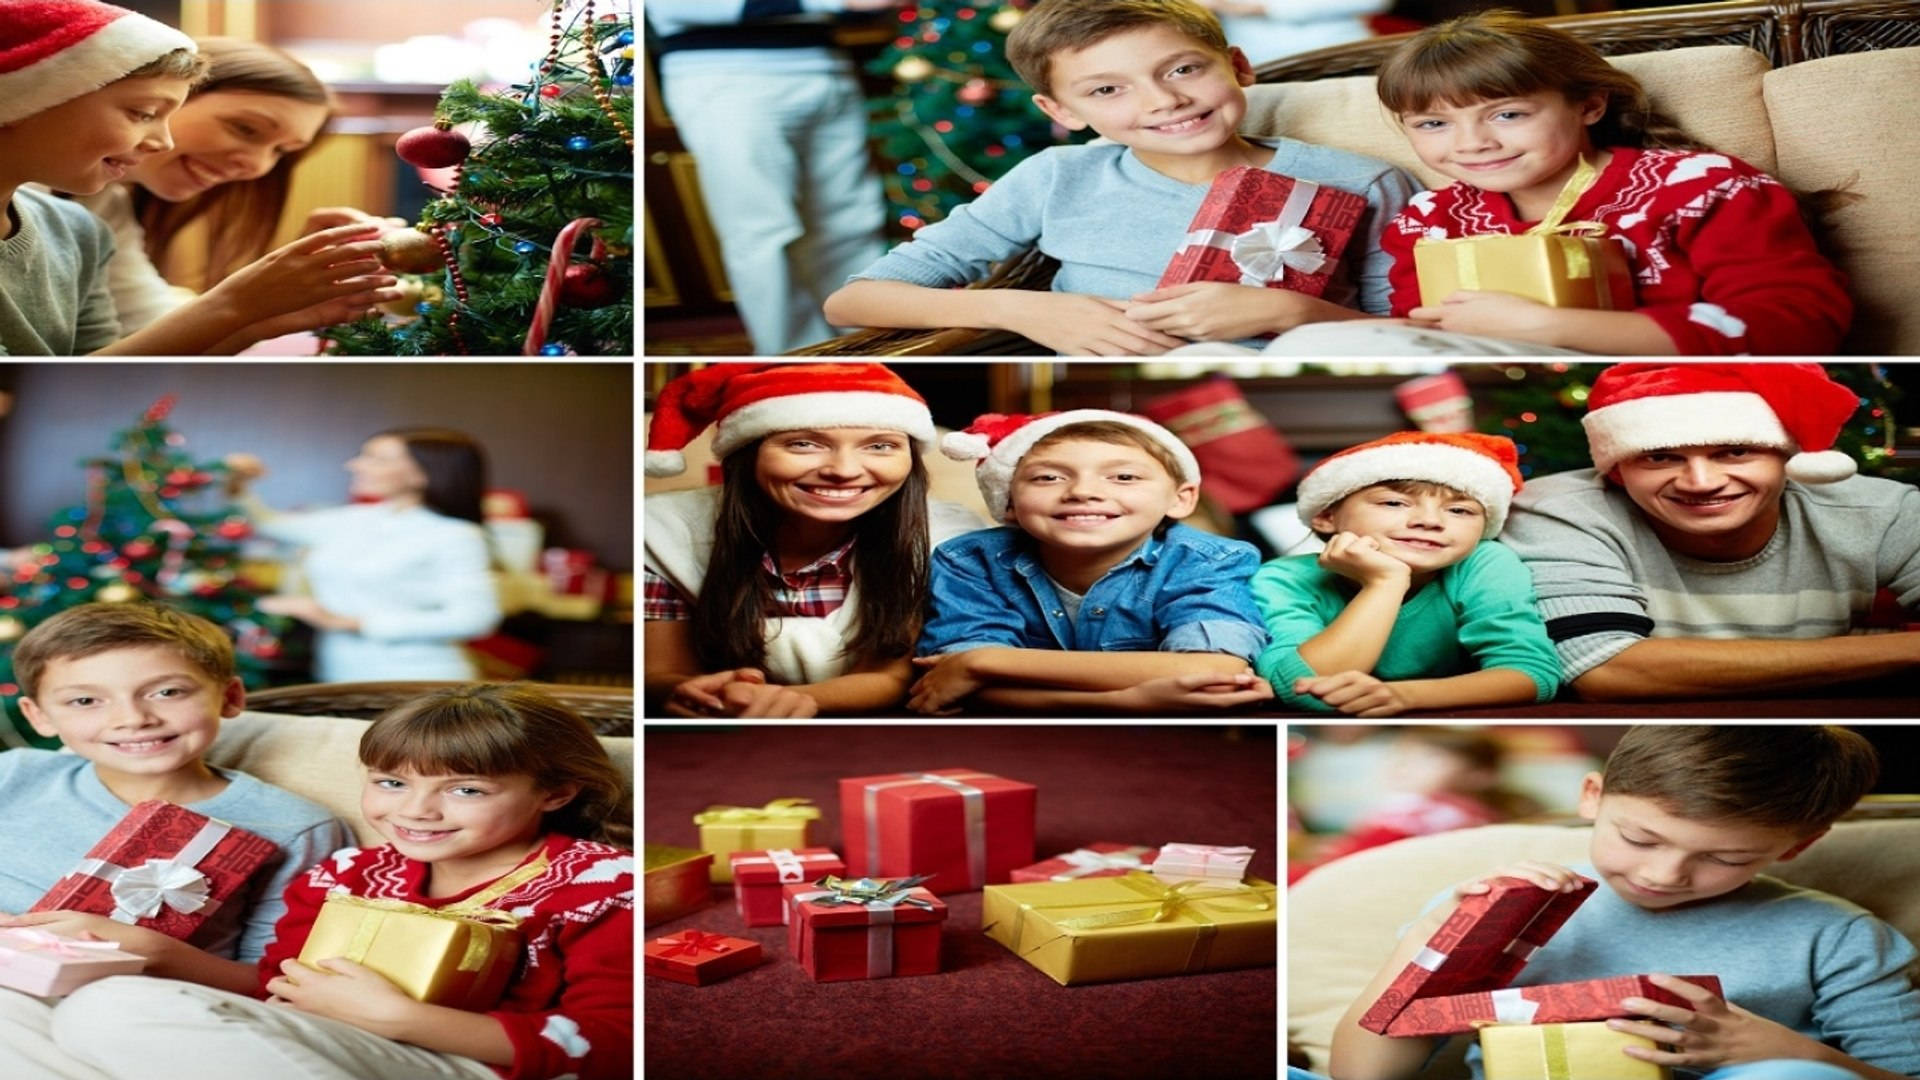 Family Christmas Collage Background